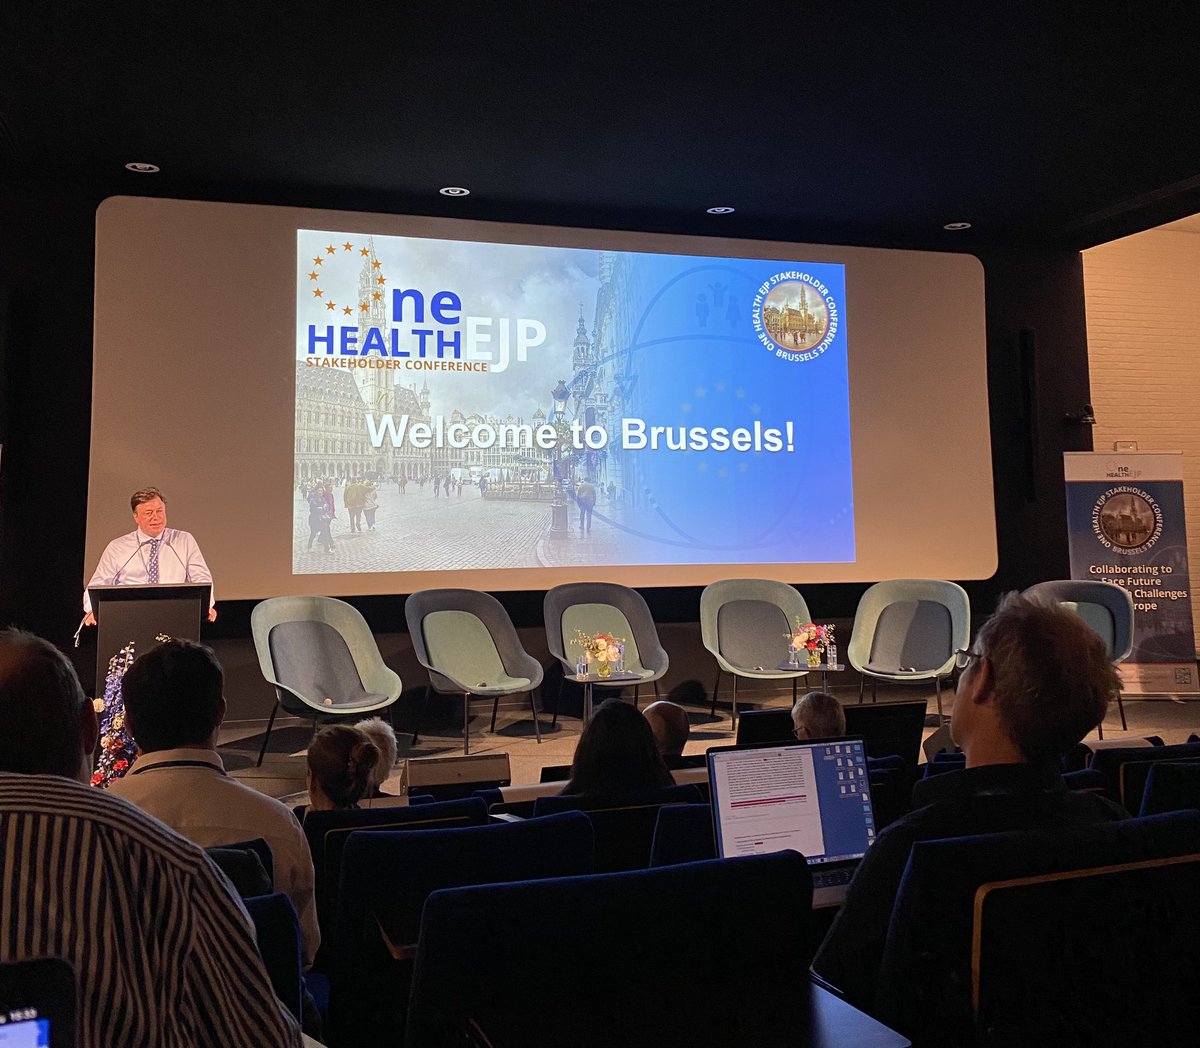 I am very happy to be here in #Brussels for the OneHealthEJP conference “Collaborating to face future #OneHealth challenges in Europe”. I am looking forward to three days of crucial reflection for the development of my thesis!